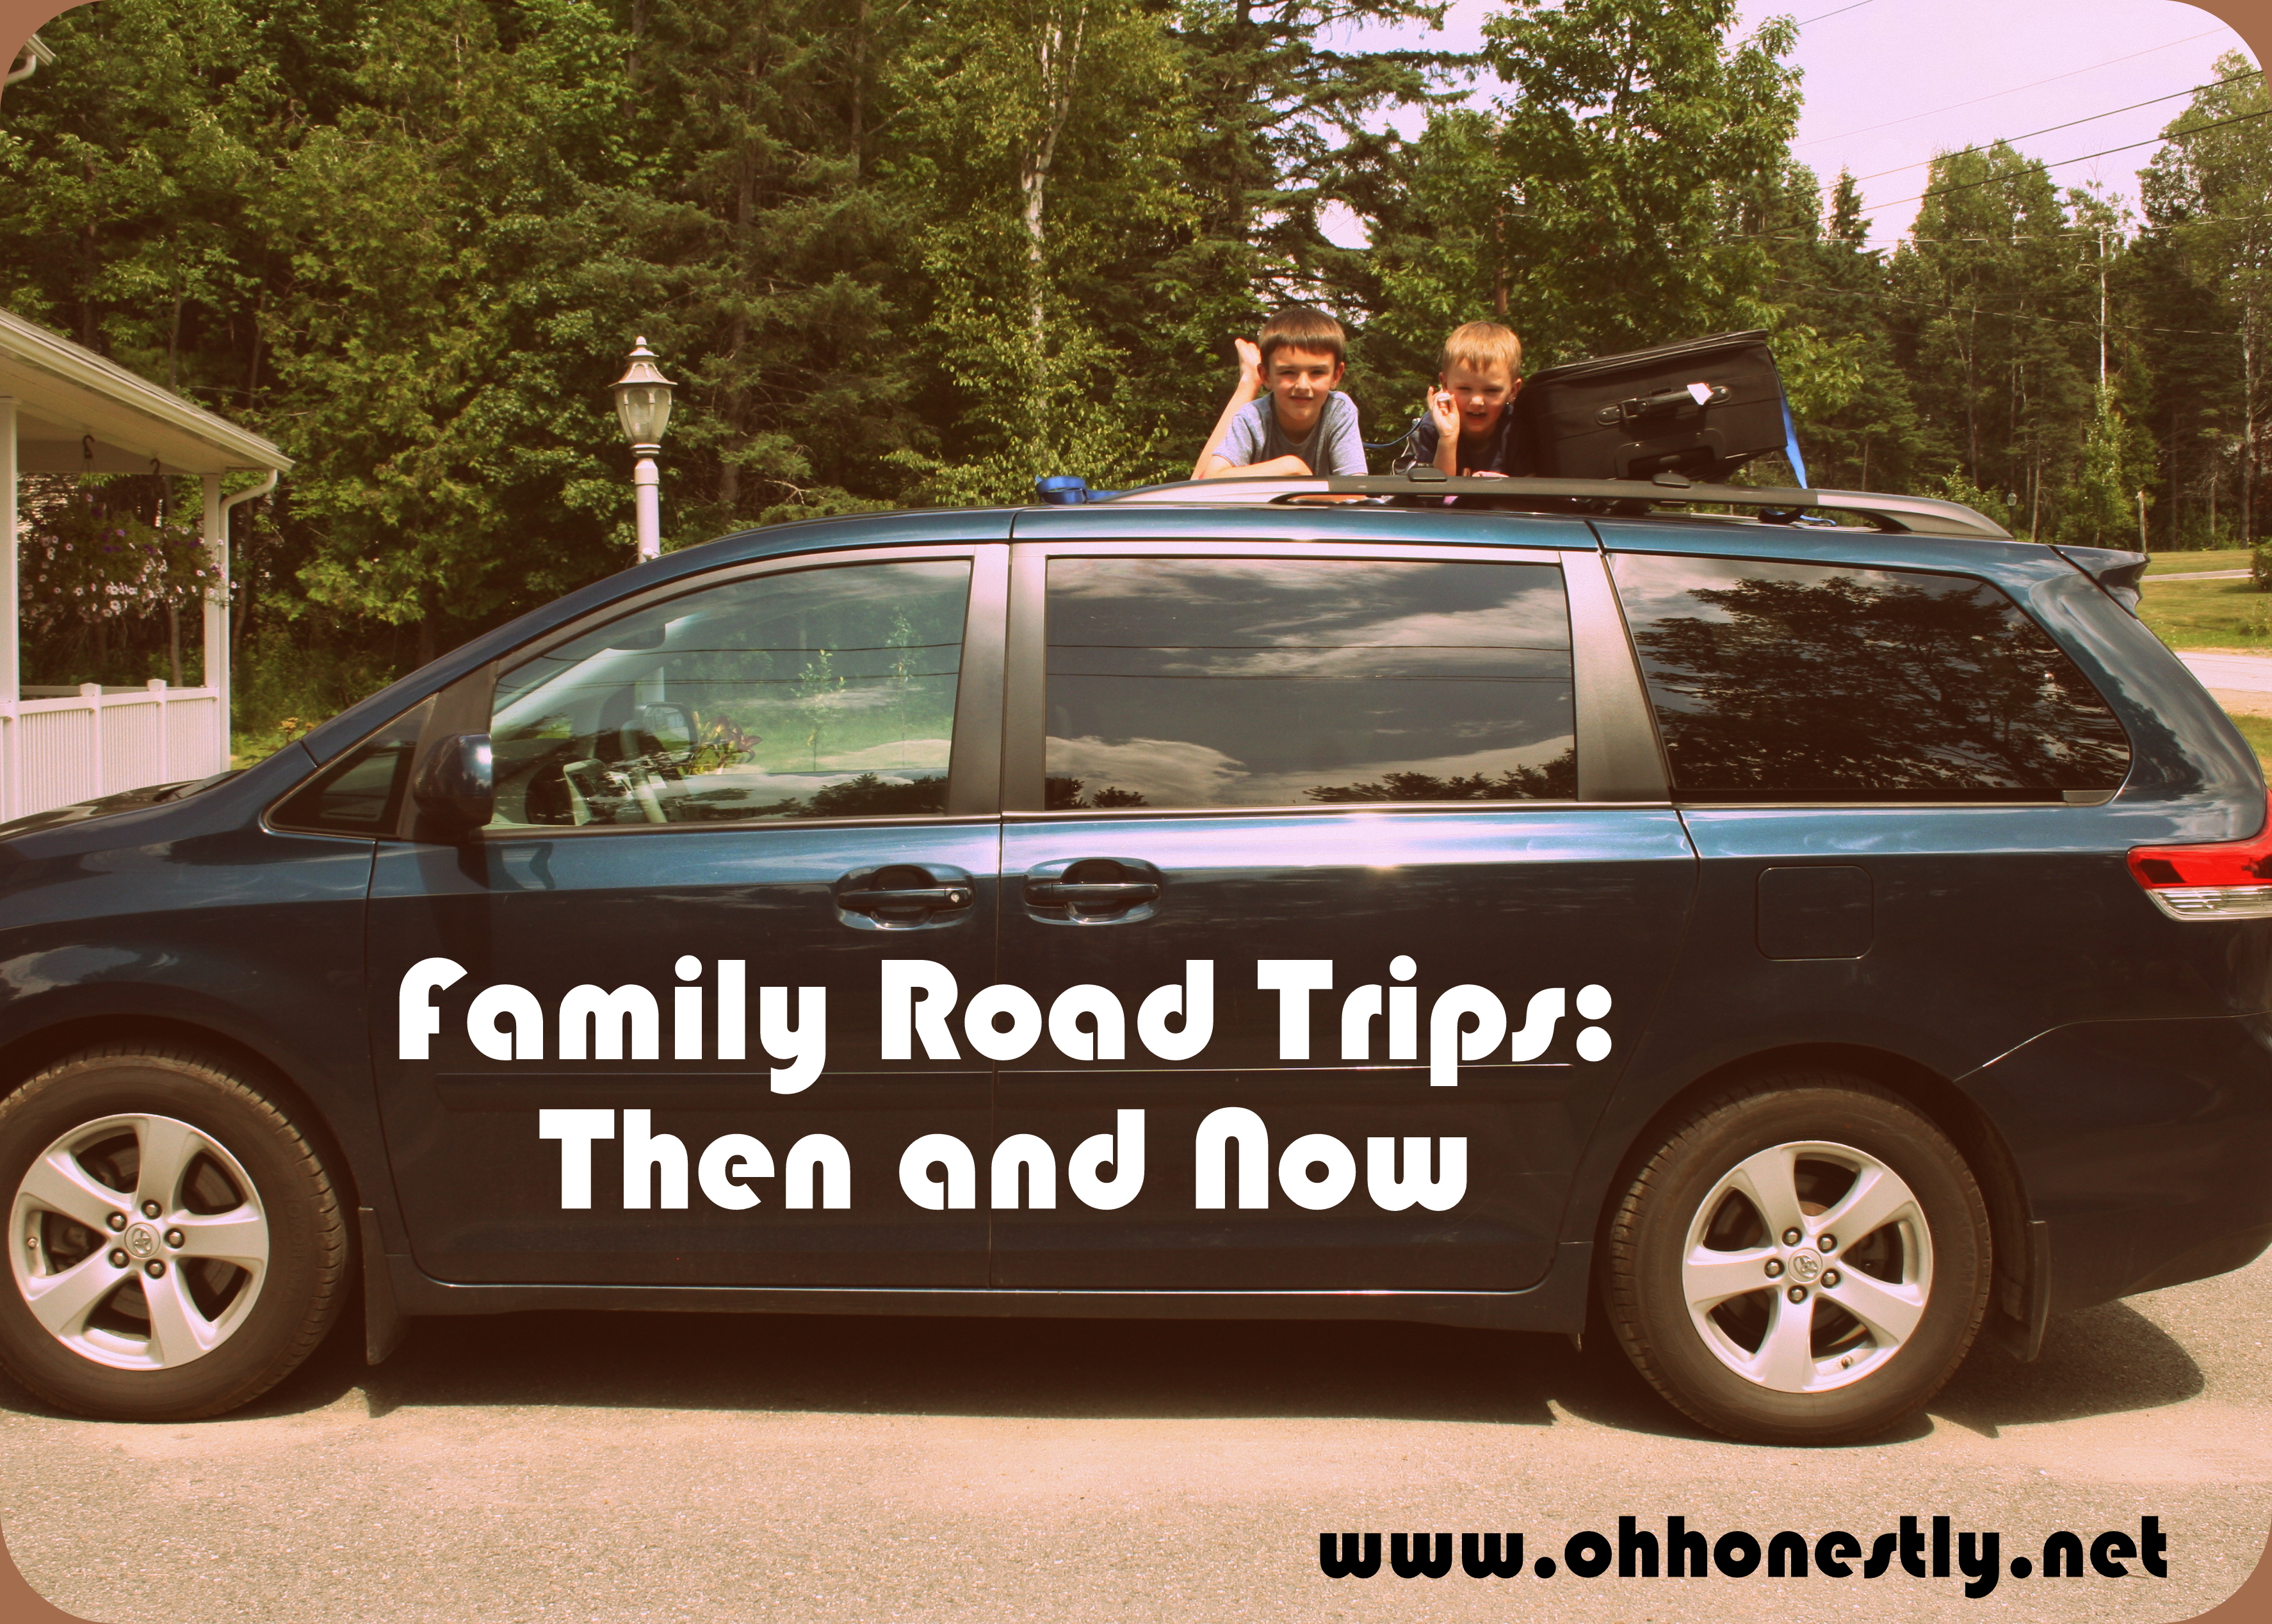 Family Road Trips: Then and Now- Oh, Honestly!